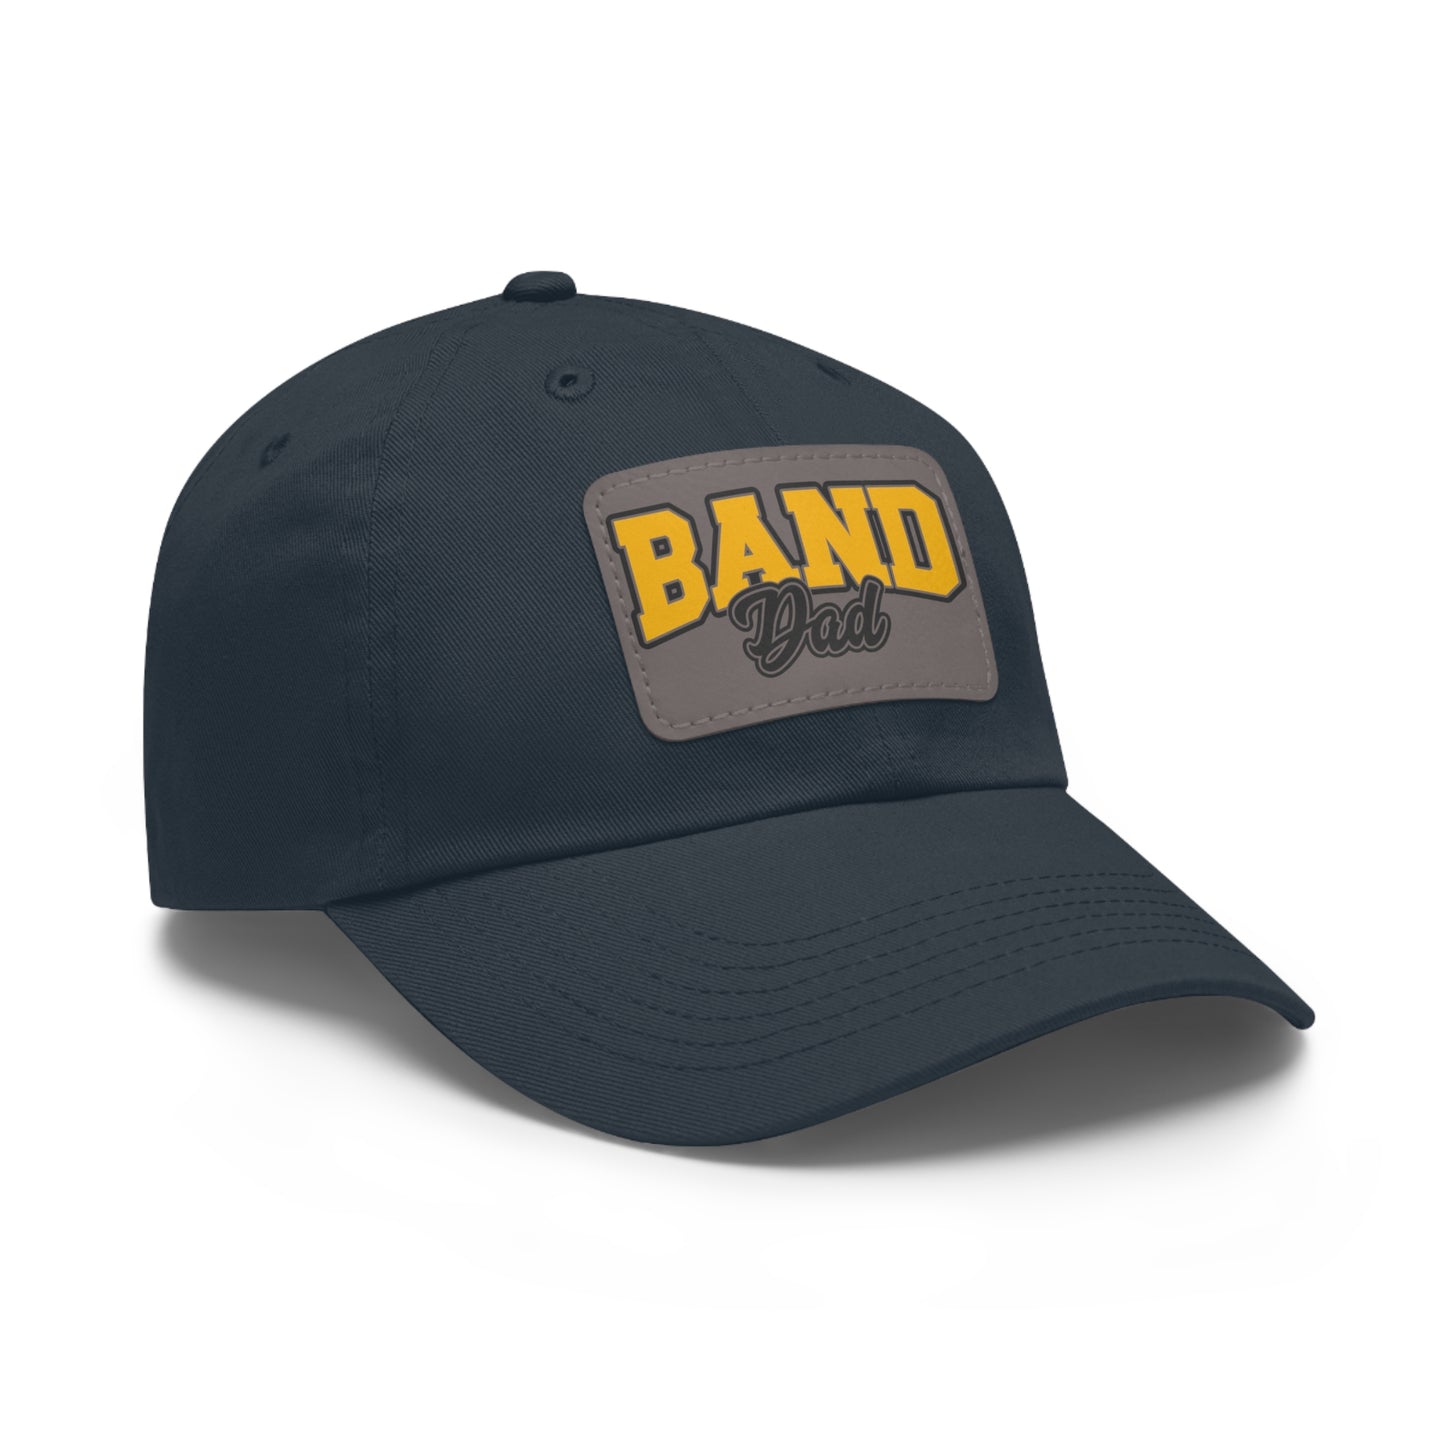 band dad hat